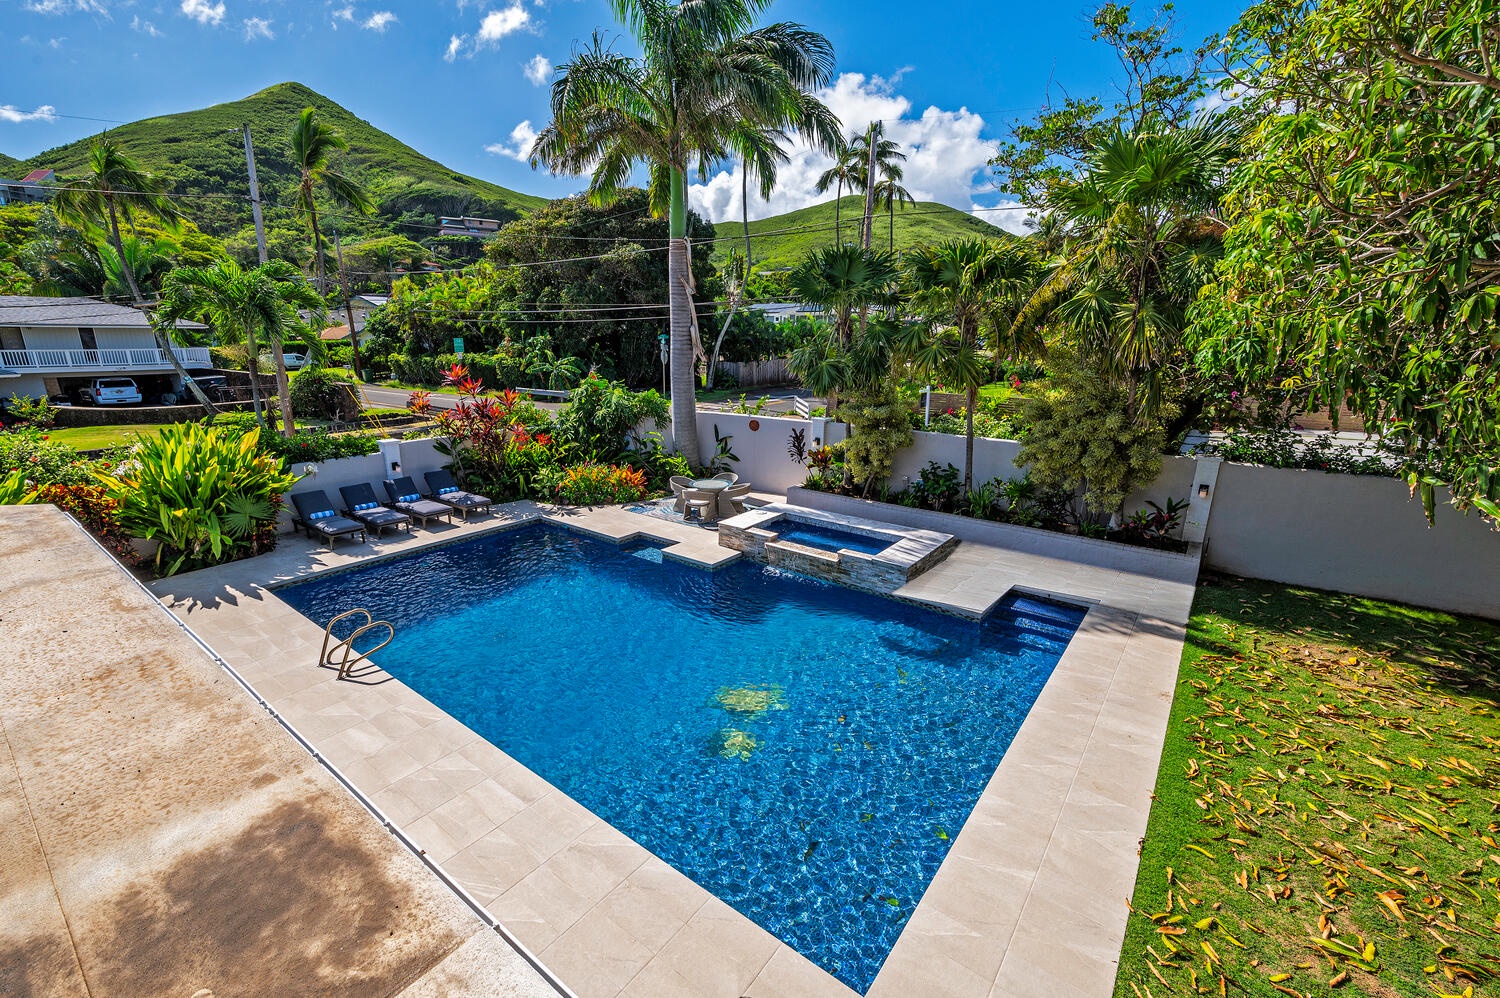 Kailua Vacation Rentals, Villa Hui Hou - Birds eye view of the pool from the media room lanai. (Note: Upper pool area is a part of the pool and NOT a spa)